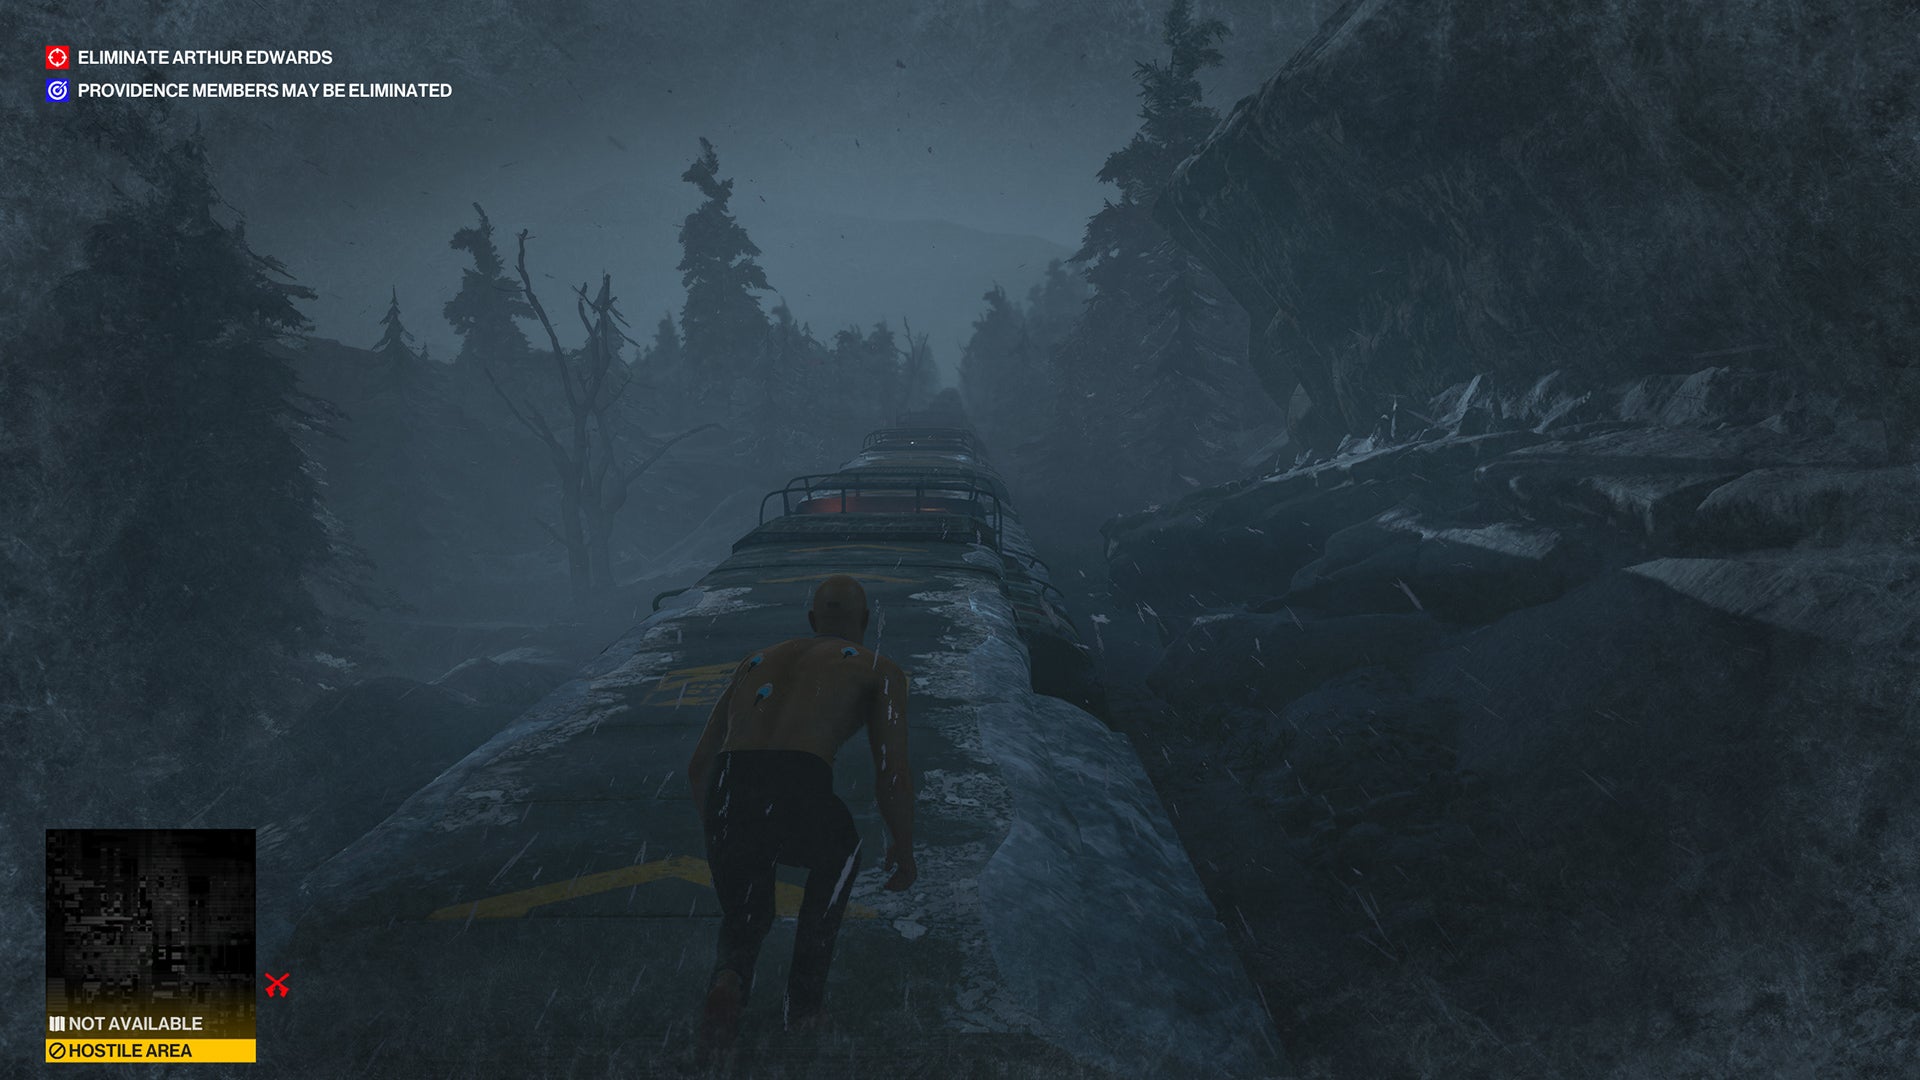 Ian Hitman is crouched on top of an icy train moving through a dark forested landscape, in the Carpathian Mountains level - the final of the trilogy.